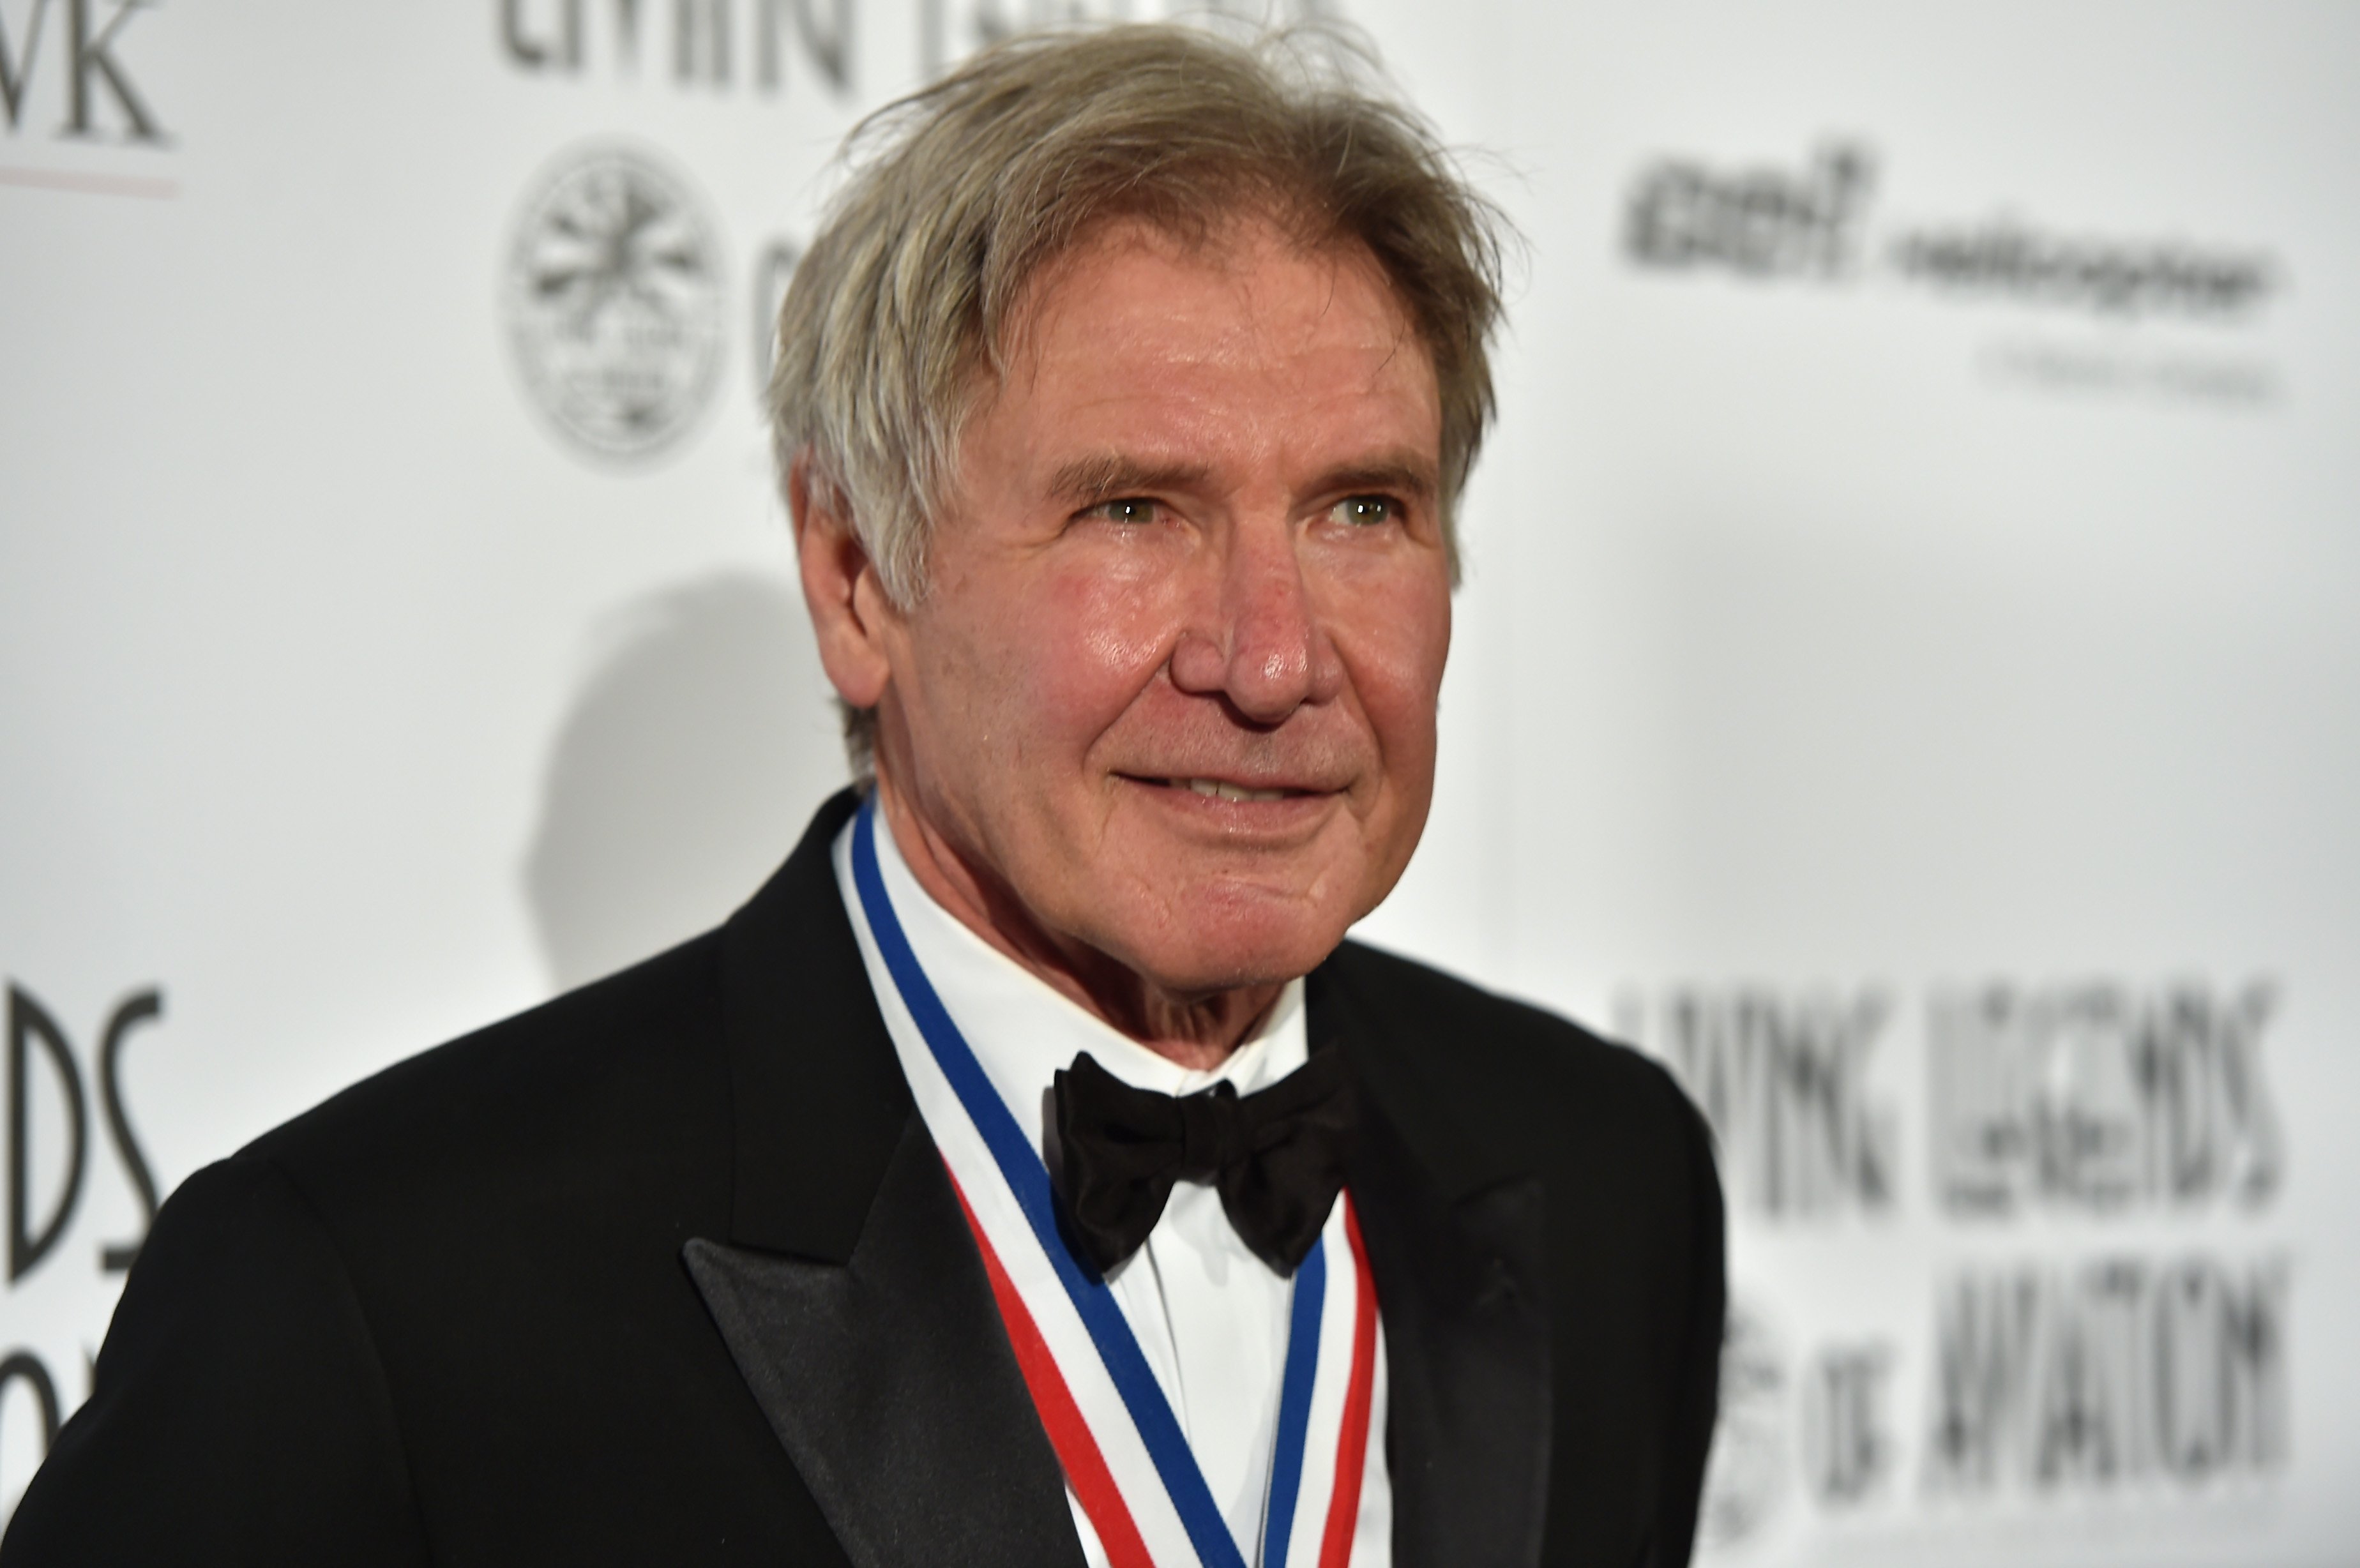  Actor Harrison Ford attends the 12th Annual "Living Legends of Aviation" on January 16, 2015. | Photo: Getty Images